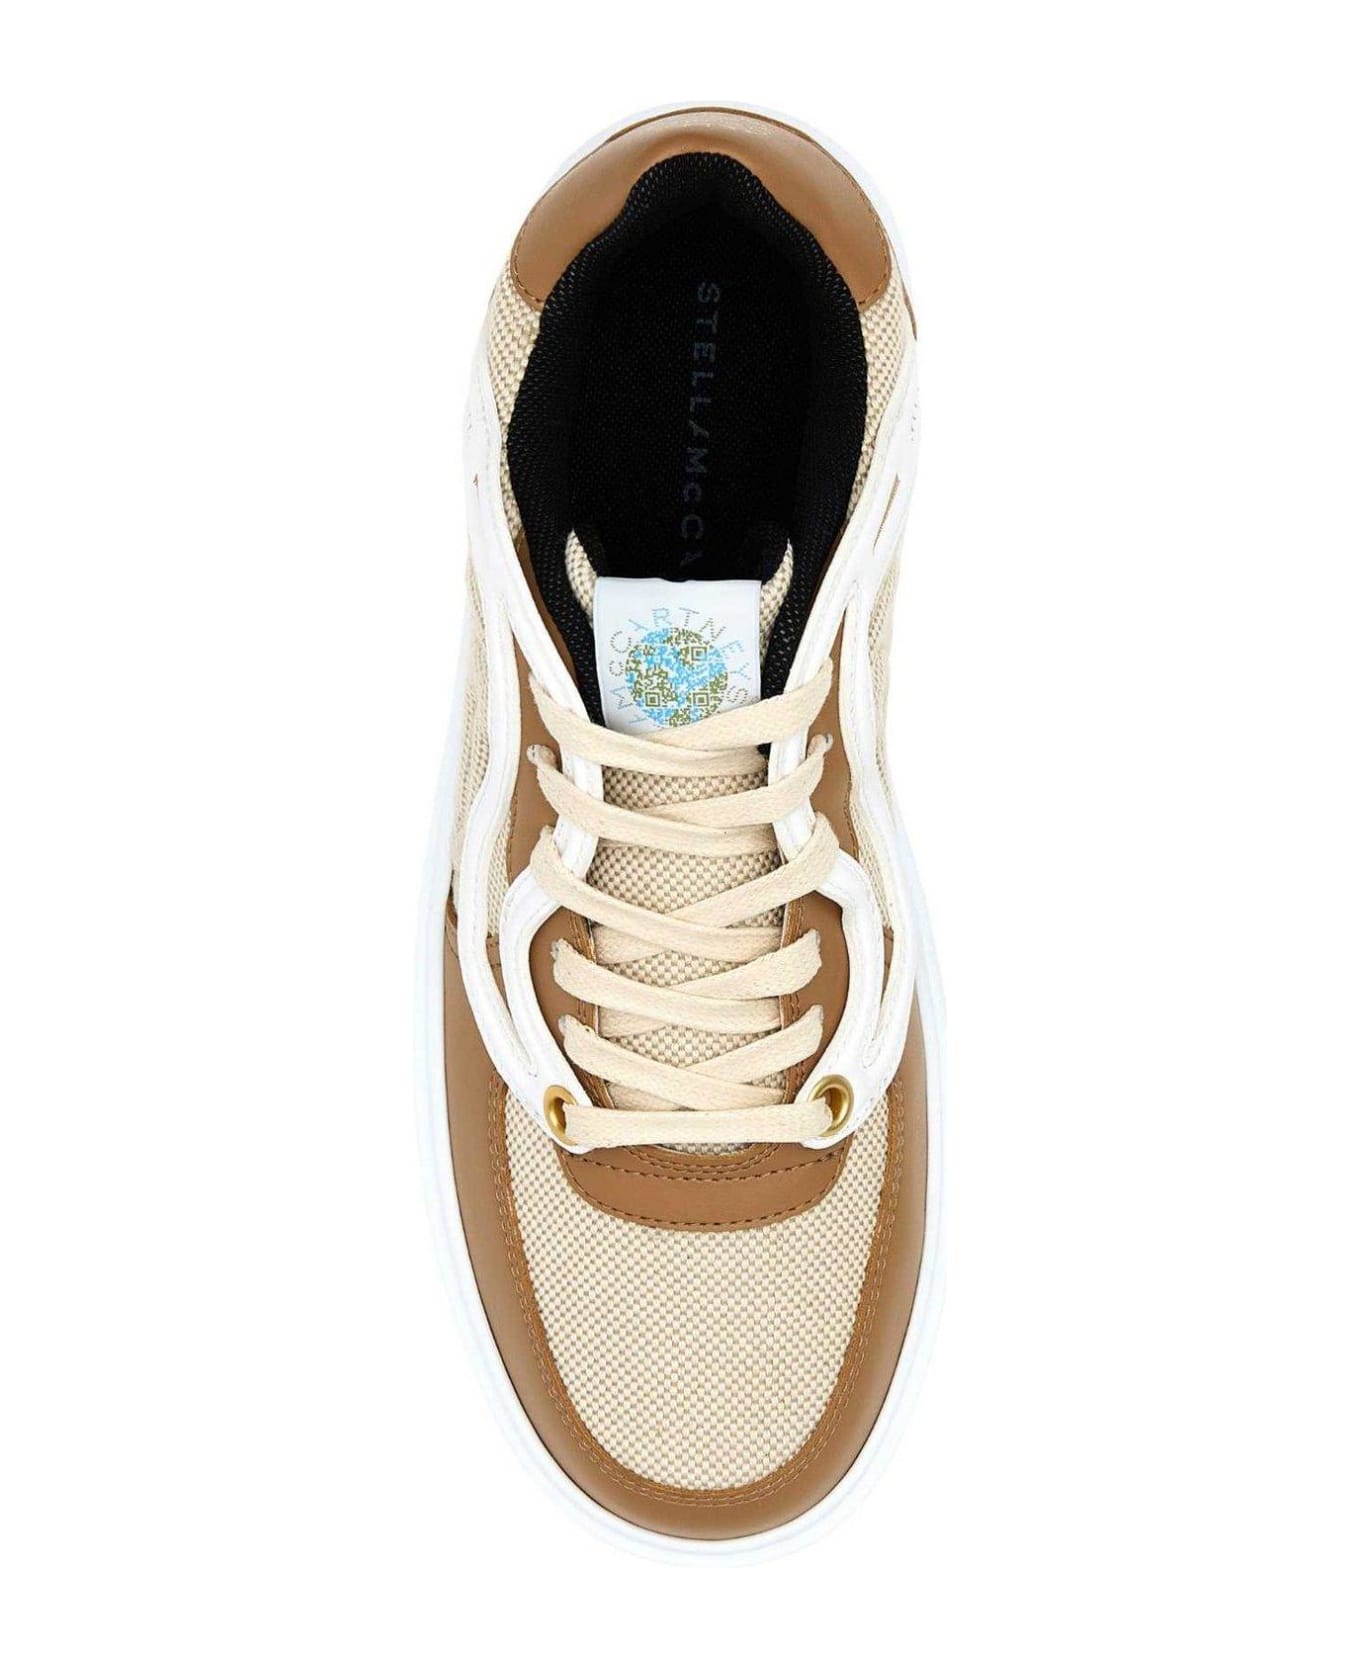 Stella McCartney S-wave 1 Low-top Sneakers - White ウェッジシューズ